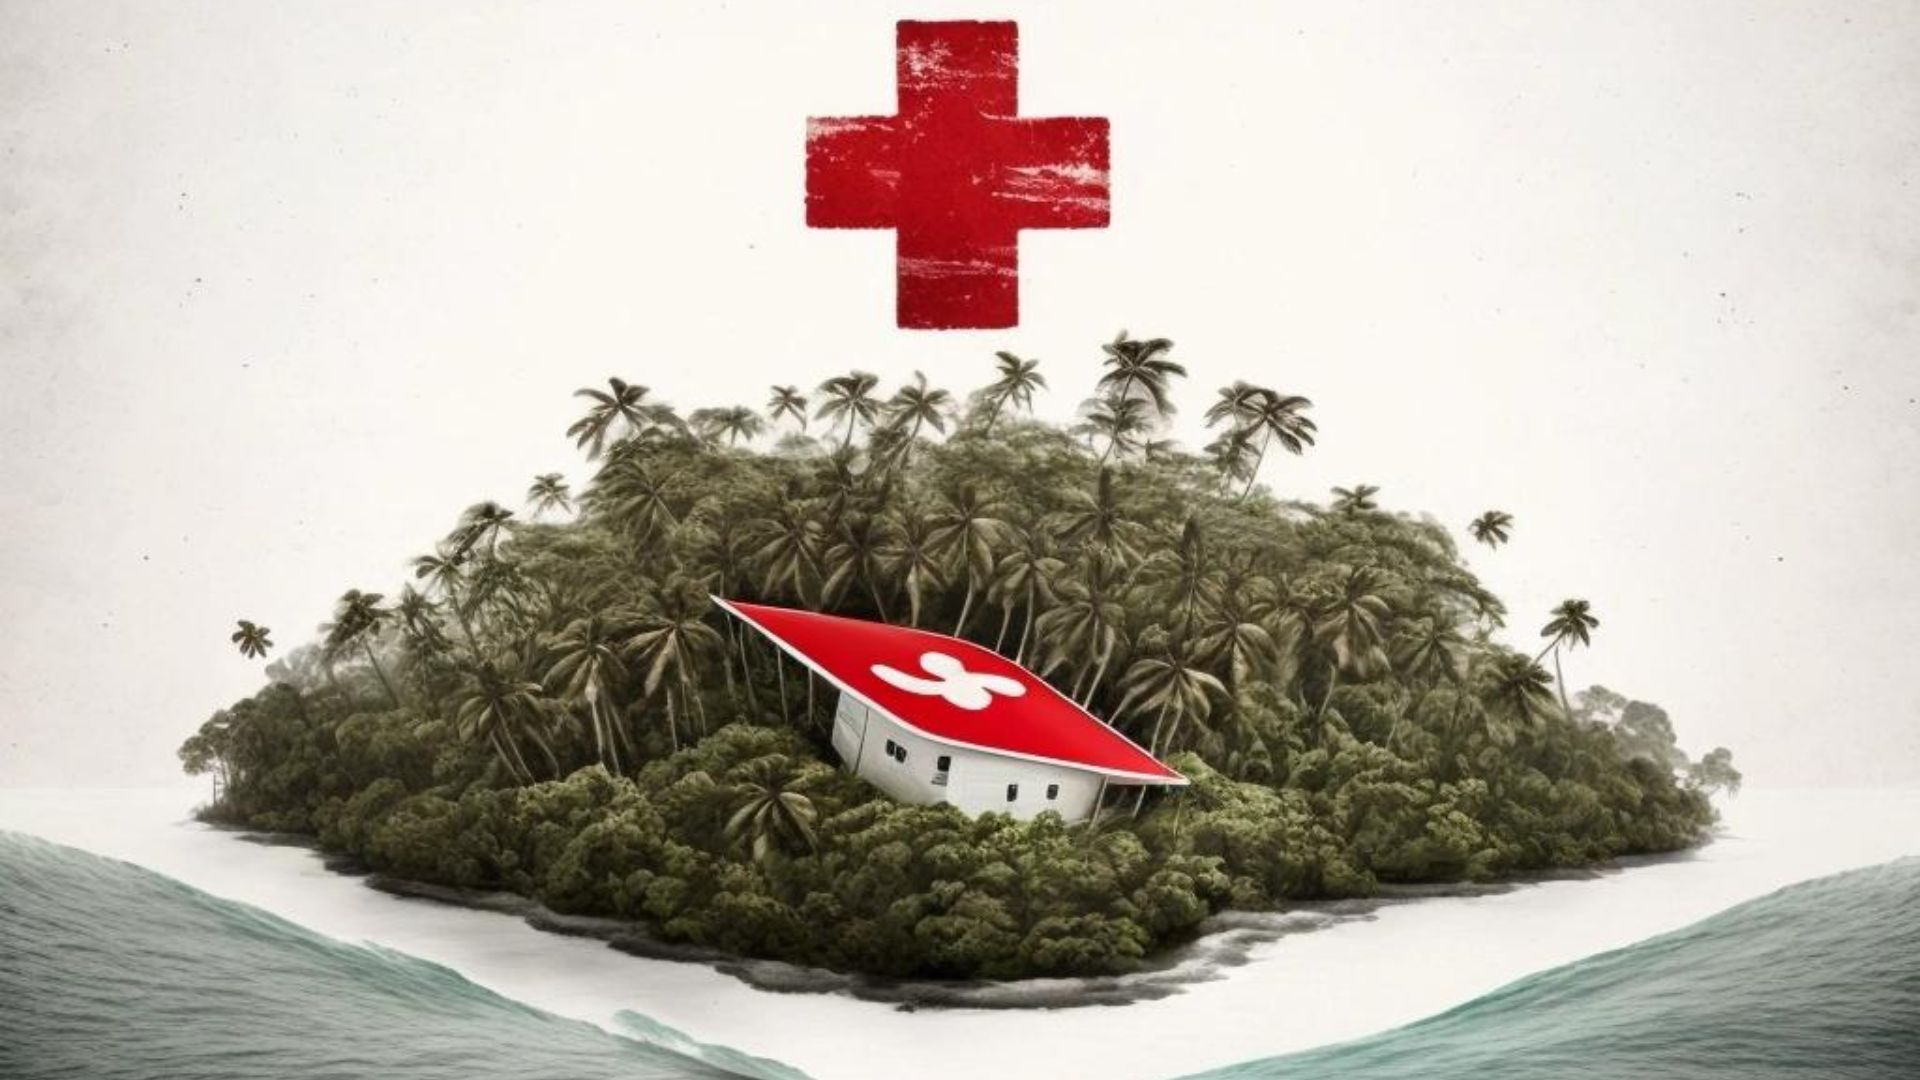 Read more about the article Vanuatu Red Cross and IFRC Provide Critical Relief Aid to Cyclone-Affected Communities